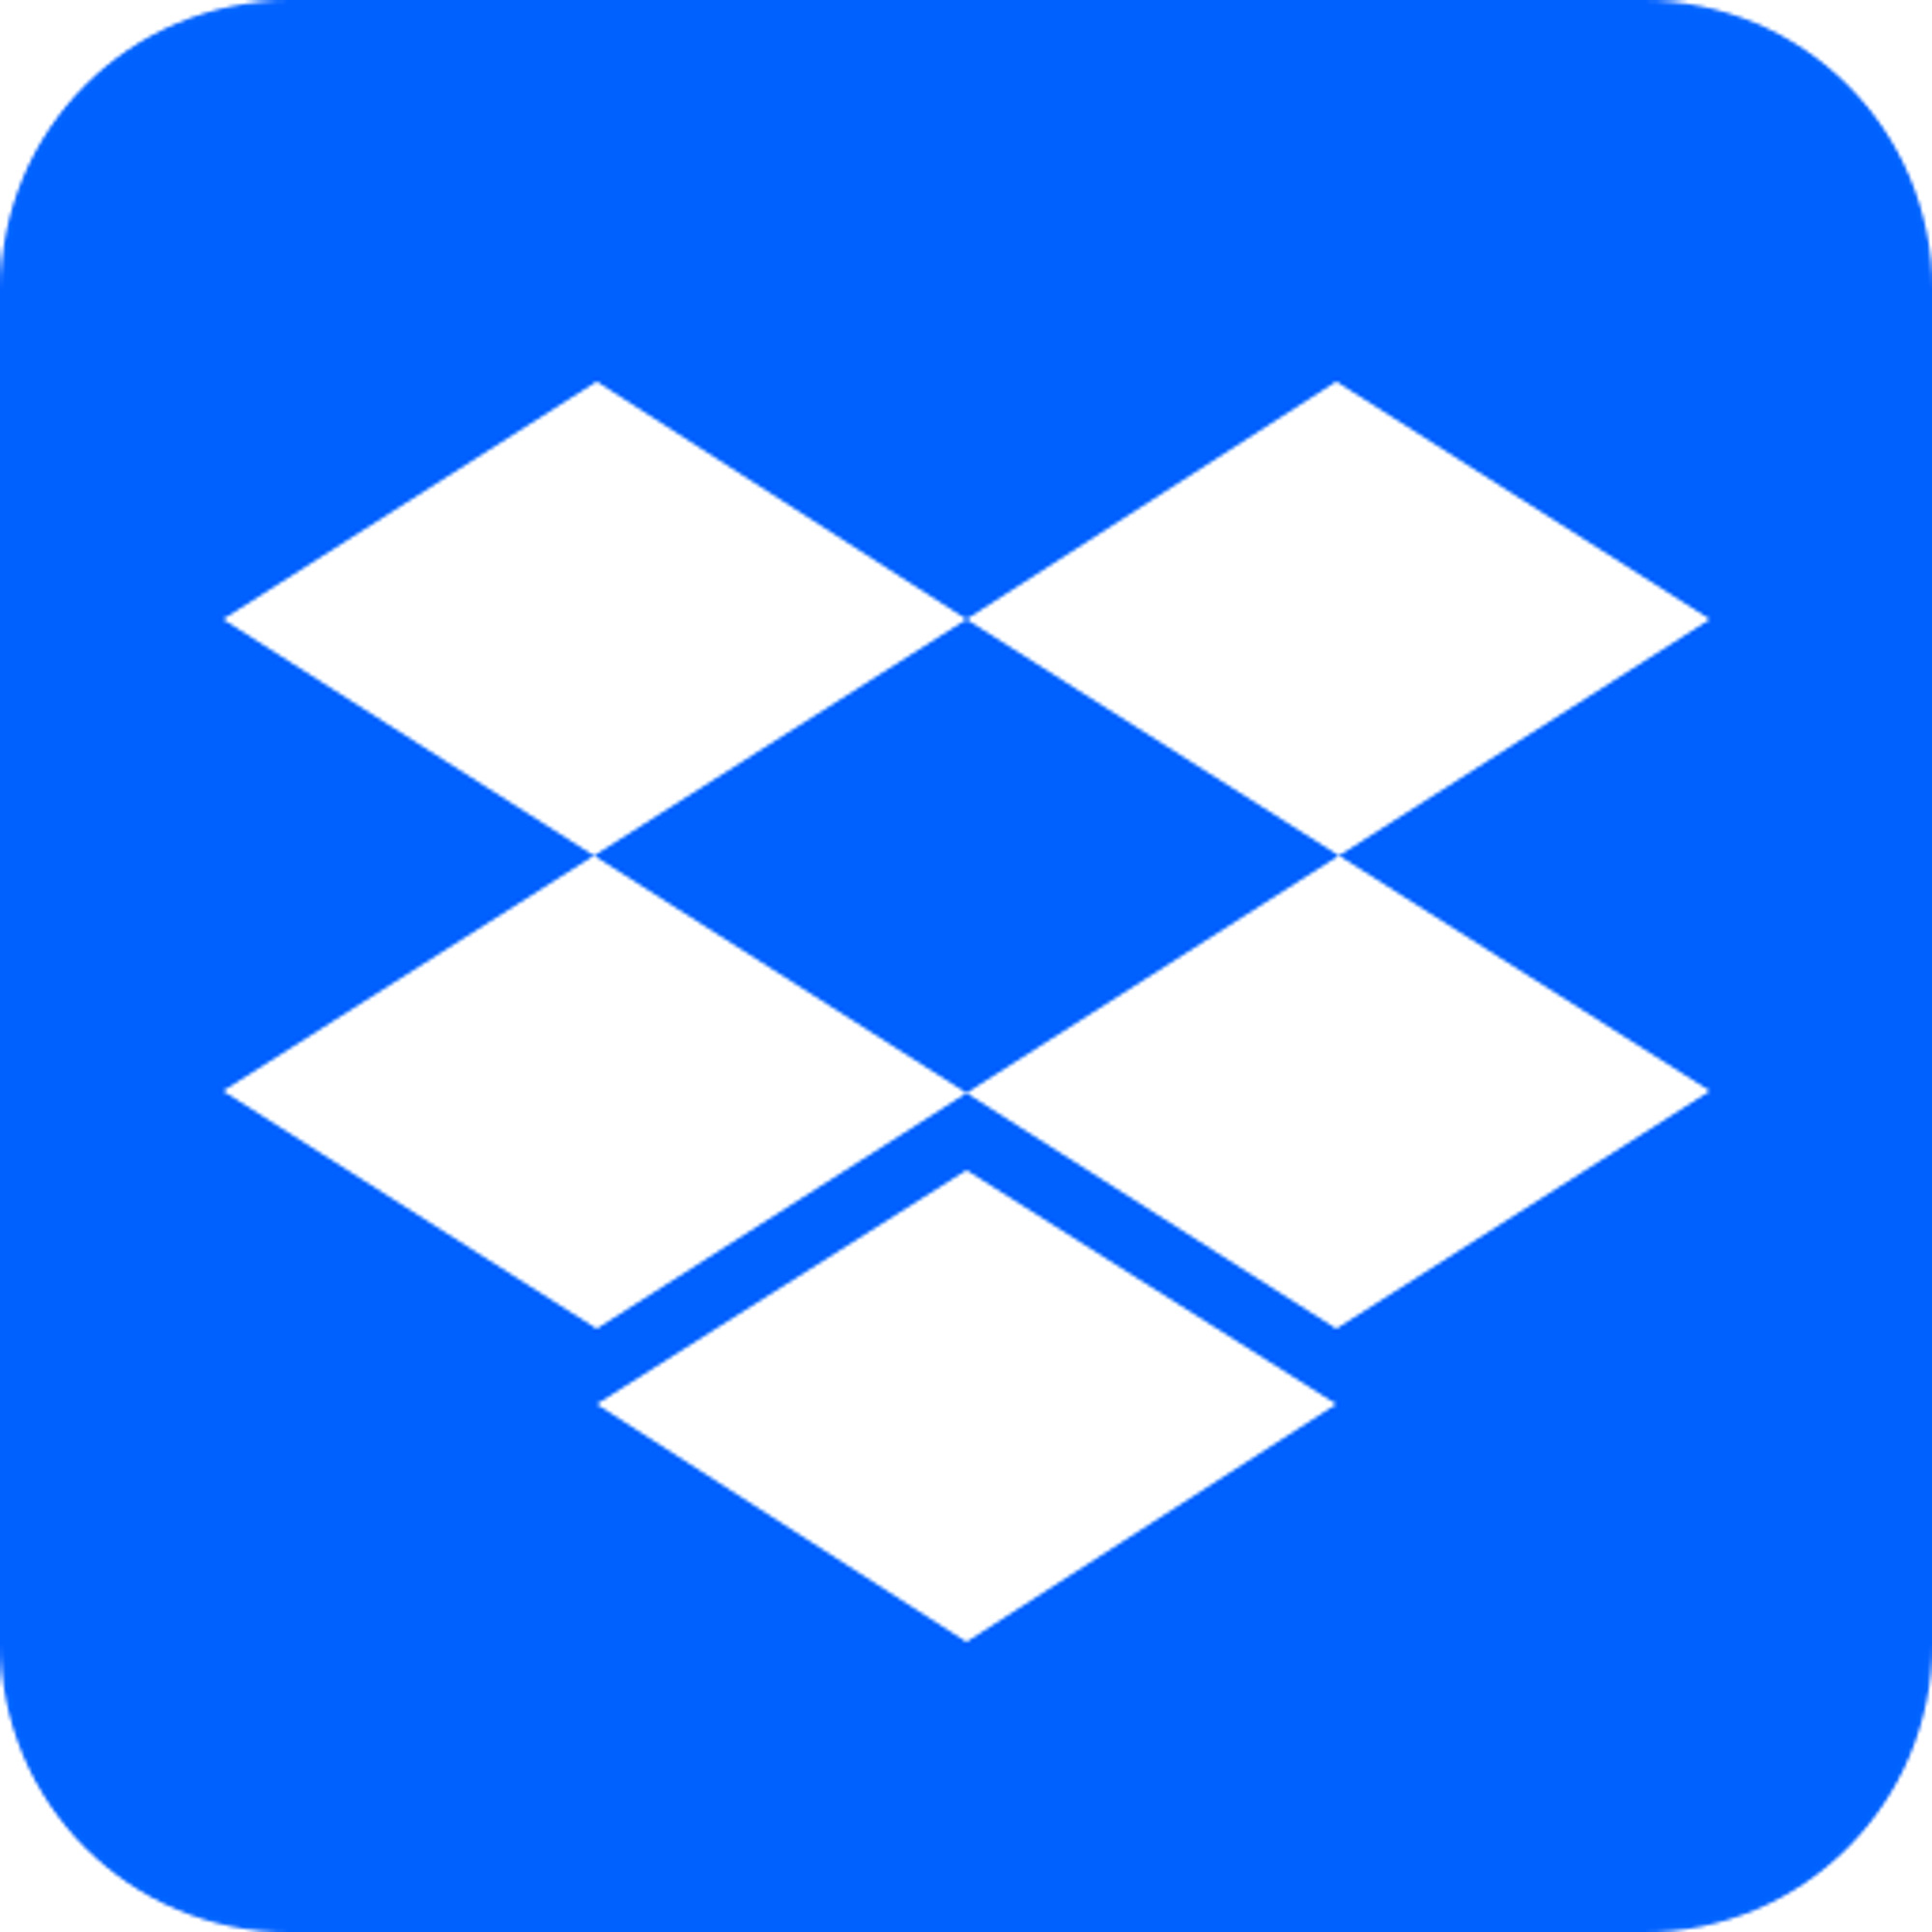 Sync file uploads to Dropbox with a form